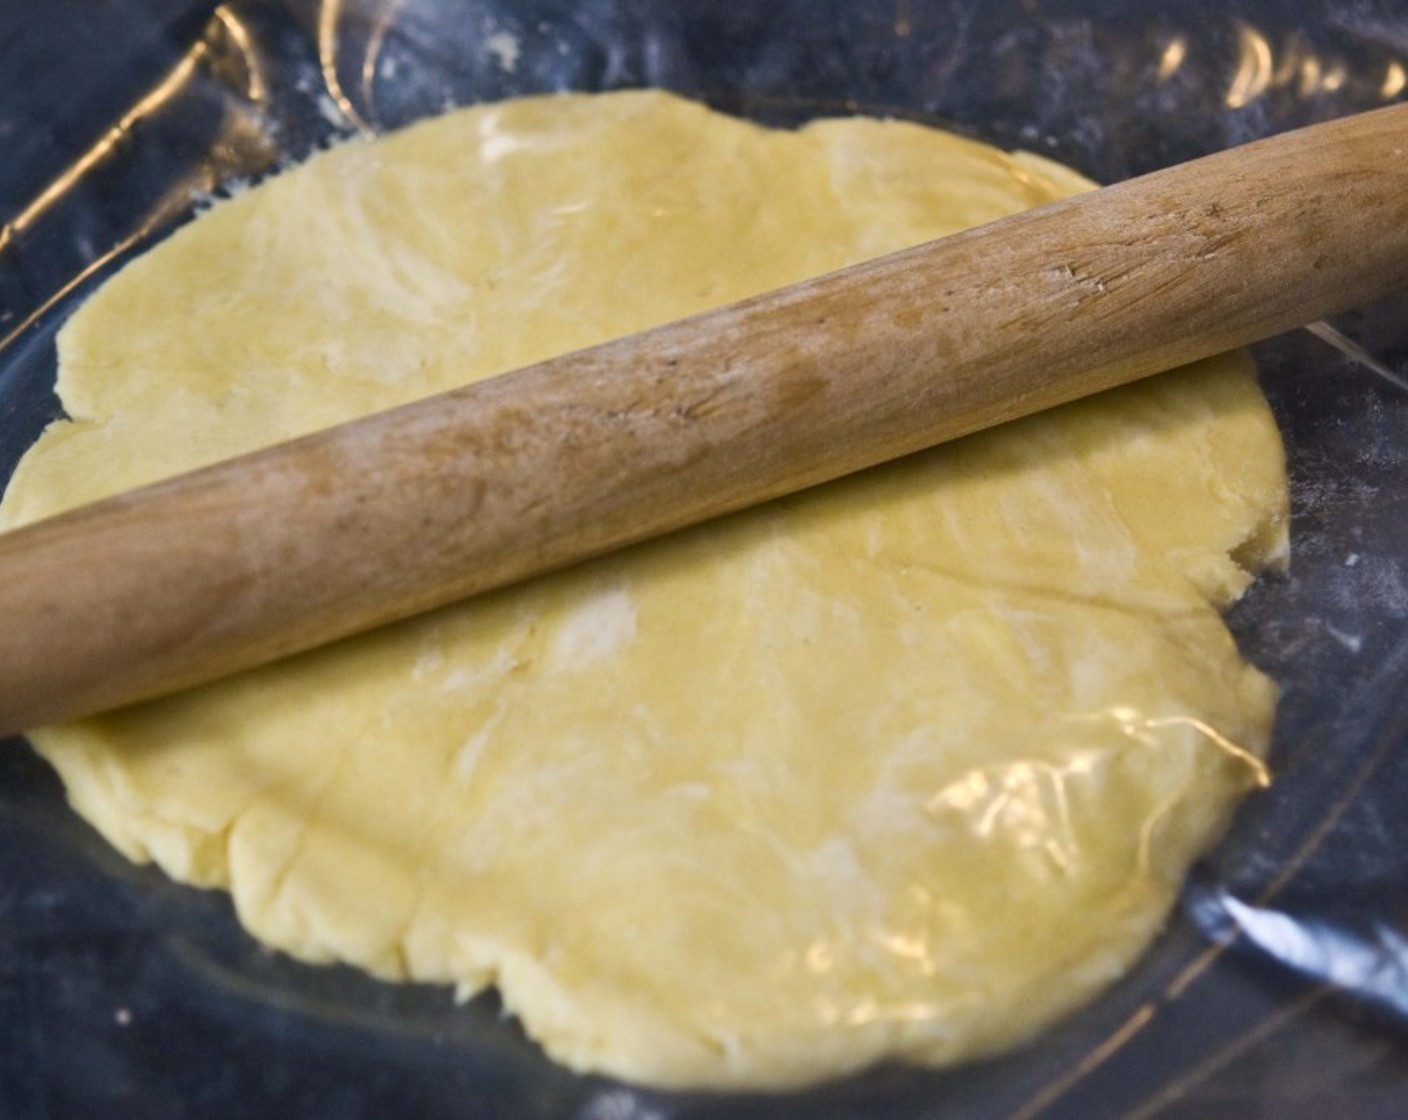 step 4 With a rolling pin, flatten the dough a bit, and transfer it into a freezer until you are ready to use it. Before making the pie, take the crust from the freezer and let it sit for about 15 minutes.